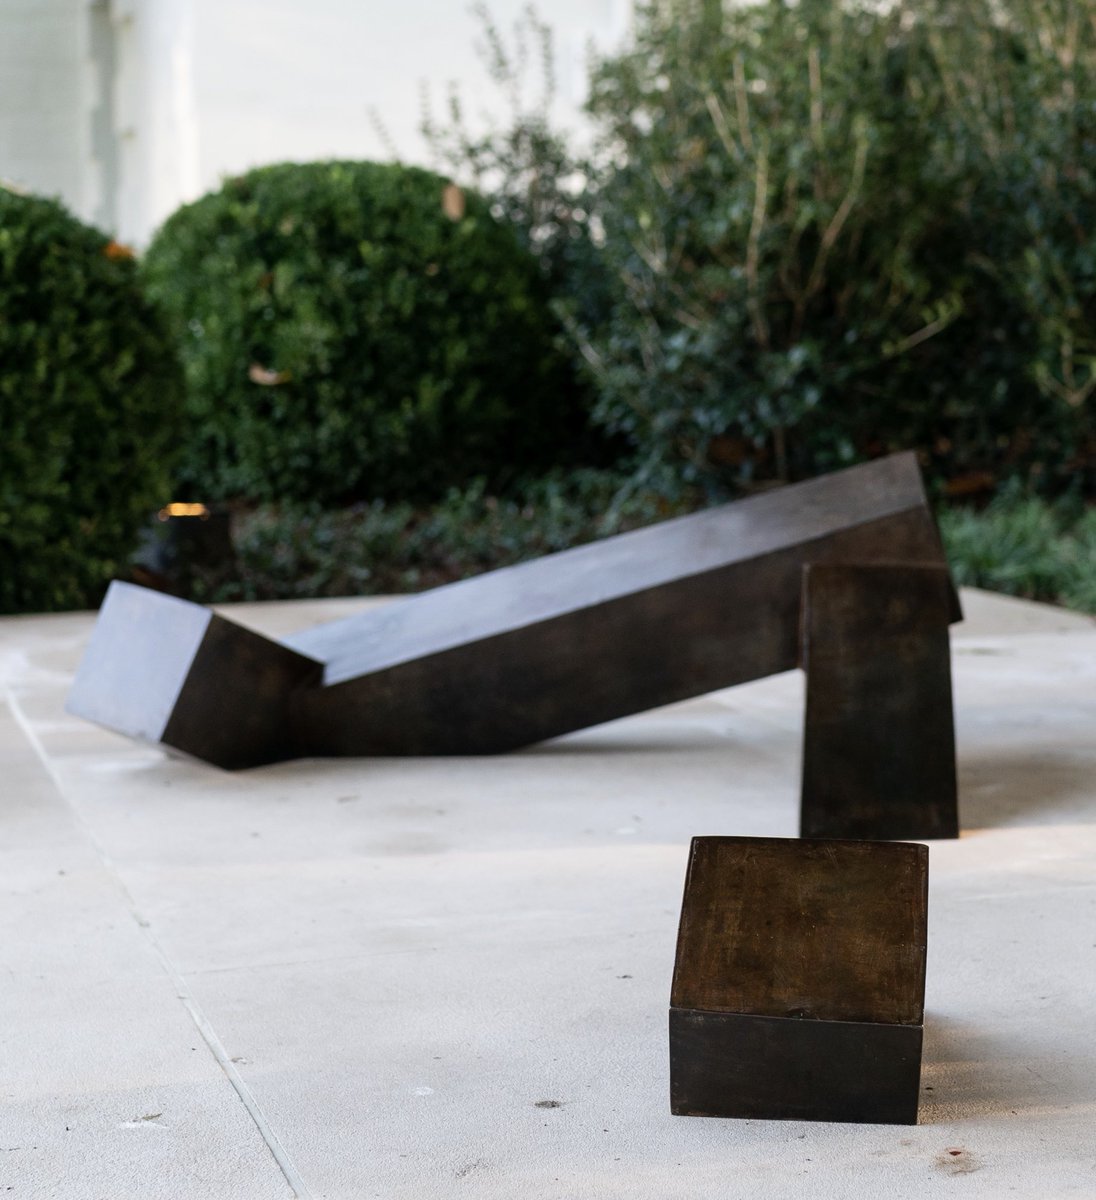 Melania Trump 45 Archived On Twitter We Unveiled Isamu Noguchi S Floor Frame Sculpture In The Rose Garden Whitehouse Yesterday The Art Piece Is Humble In Scale Complements The Authority Of The Oval